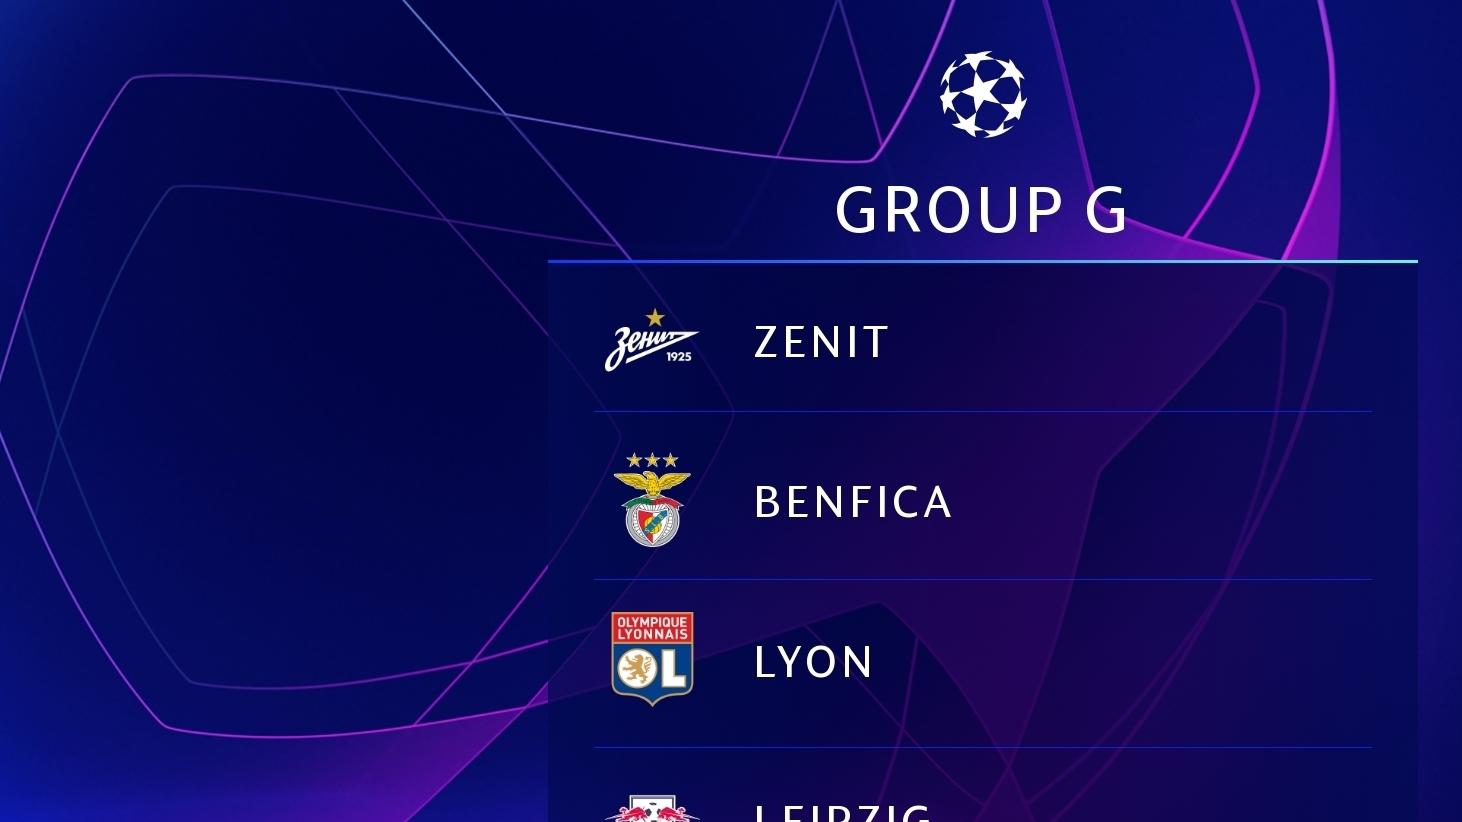 Champions League Group G 2017/18: Real begin title defence